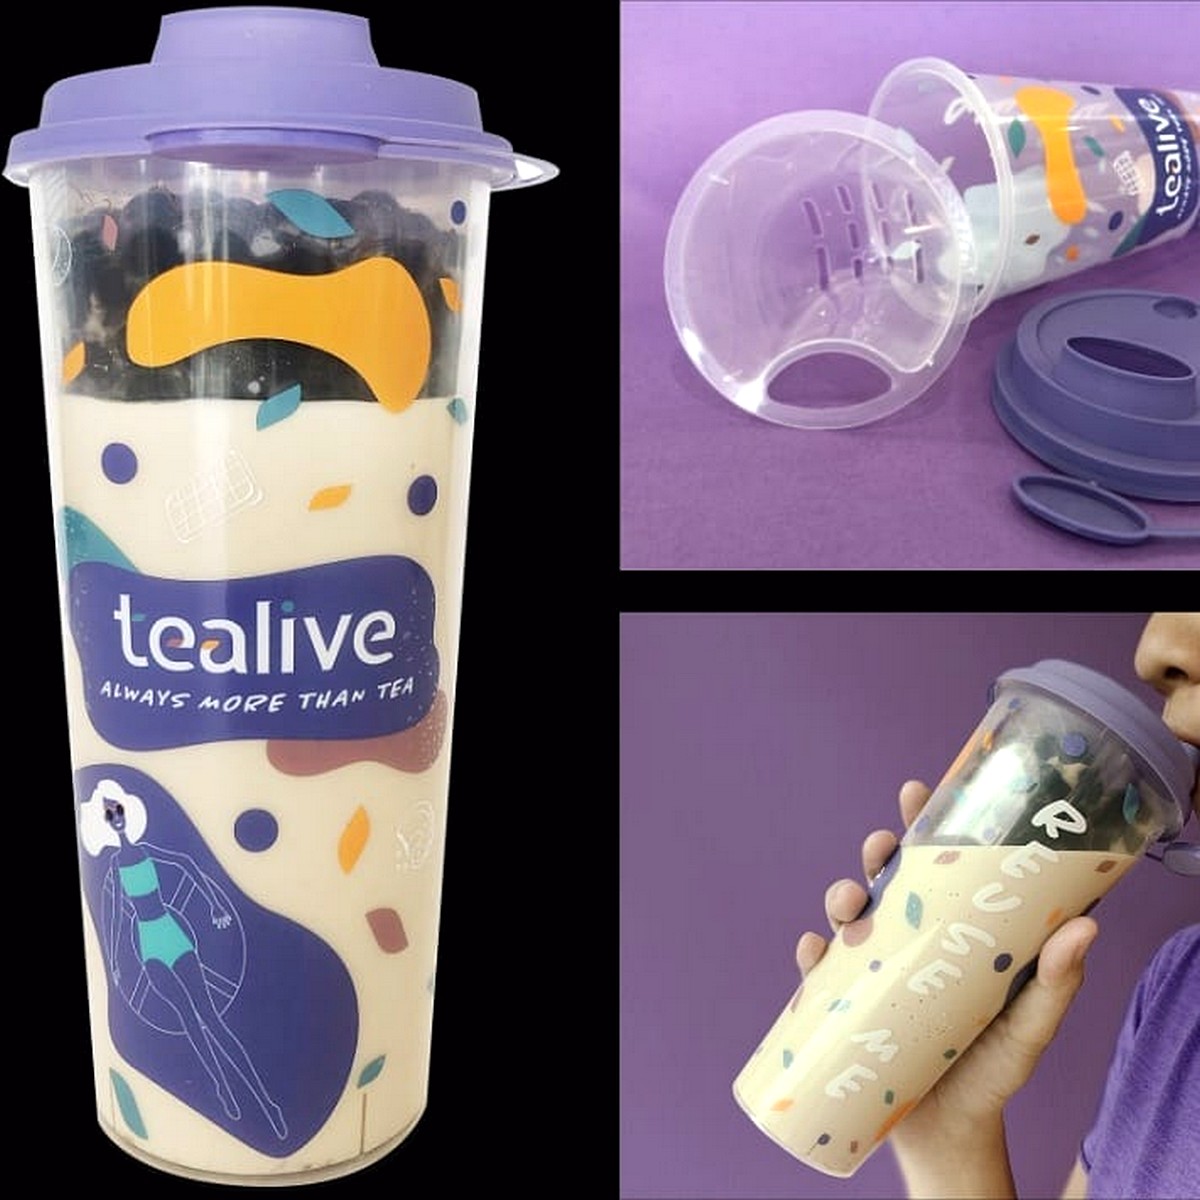 Tealive Malaysia's First Strawless Reusable Bubble Tea Cup! Full of Boba  Pearls Each Time You Drink It! - EverydayOnSales.com News